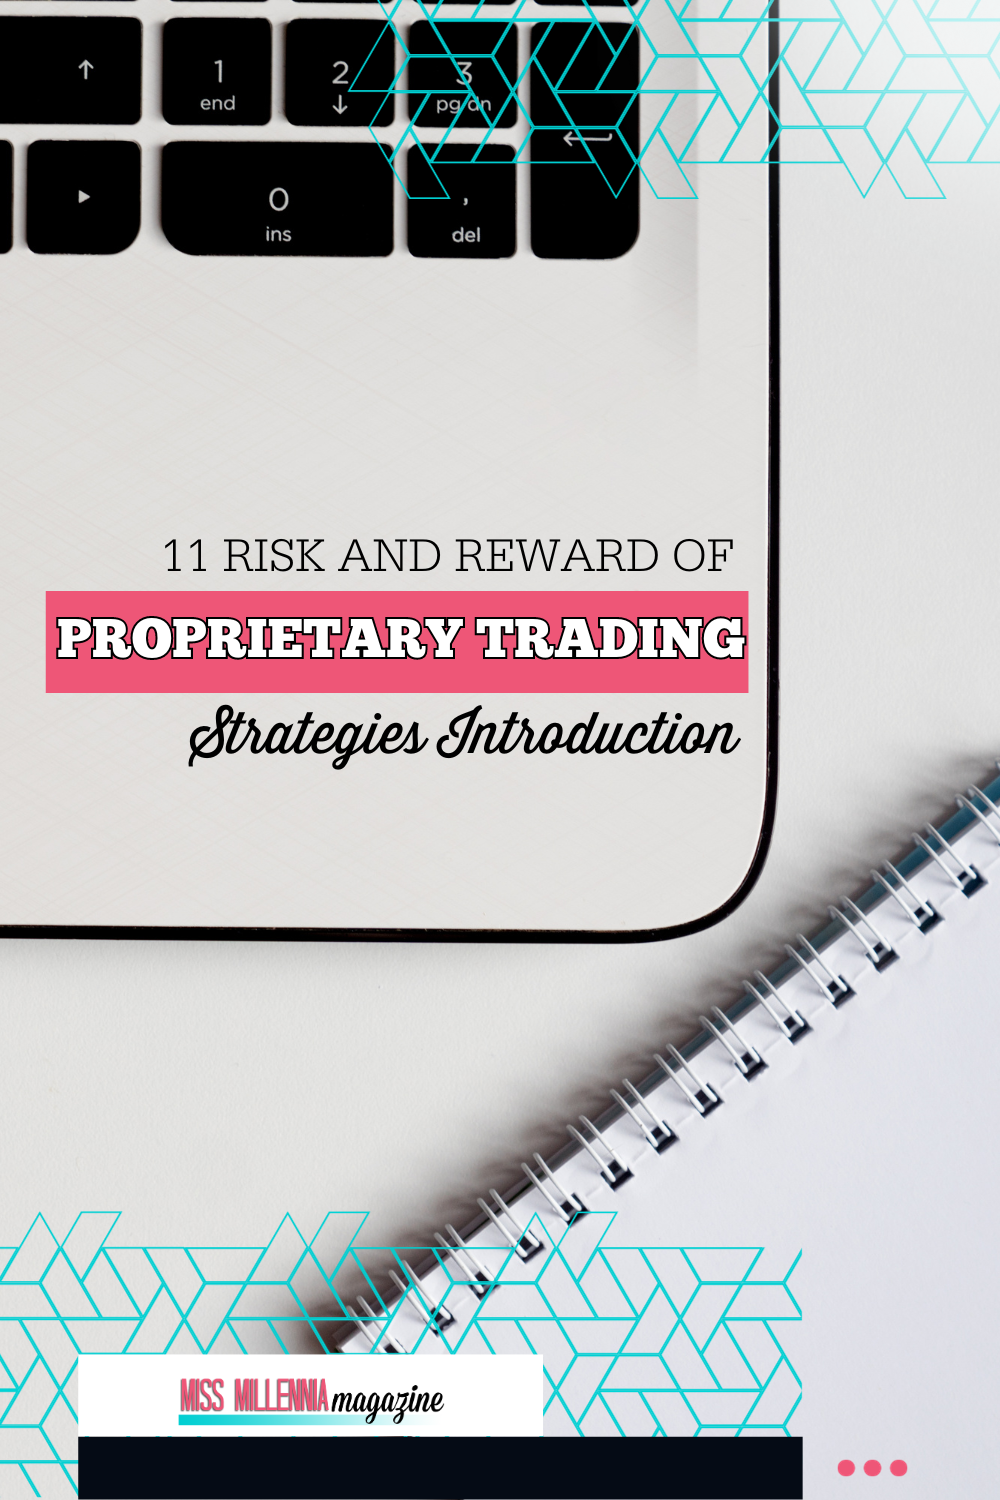 11 Risk and Reward of Proprietary Trading Strategies Introduction